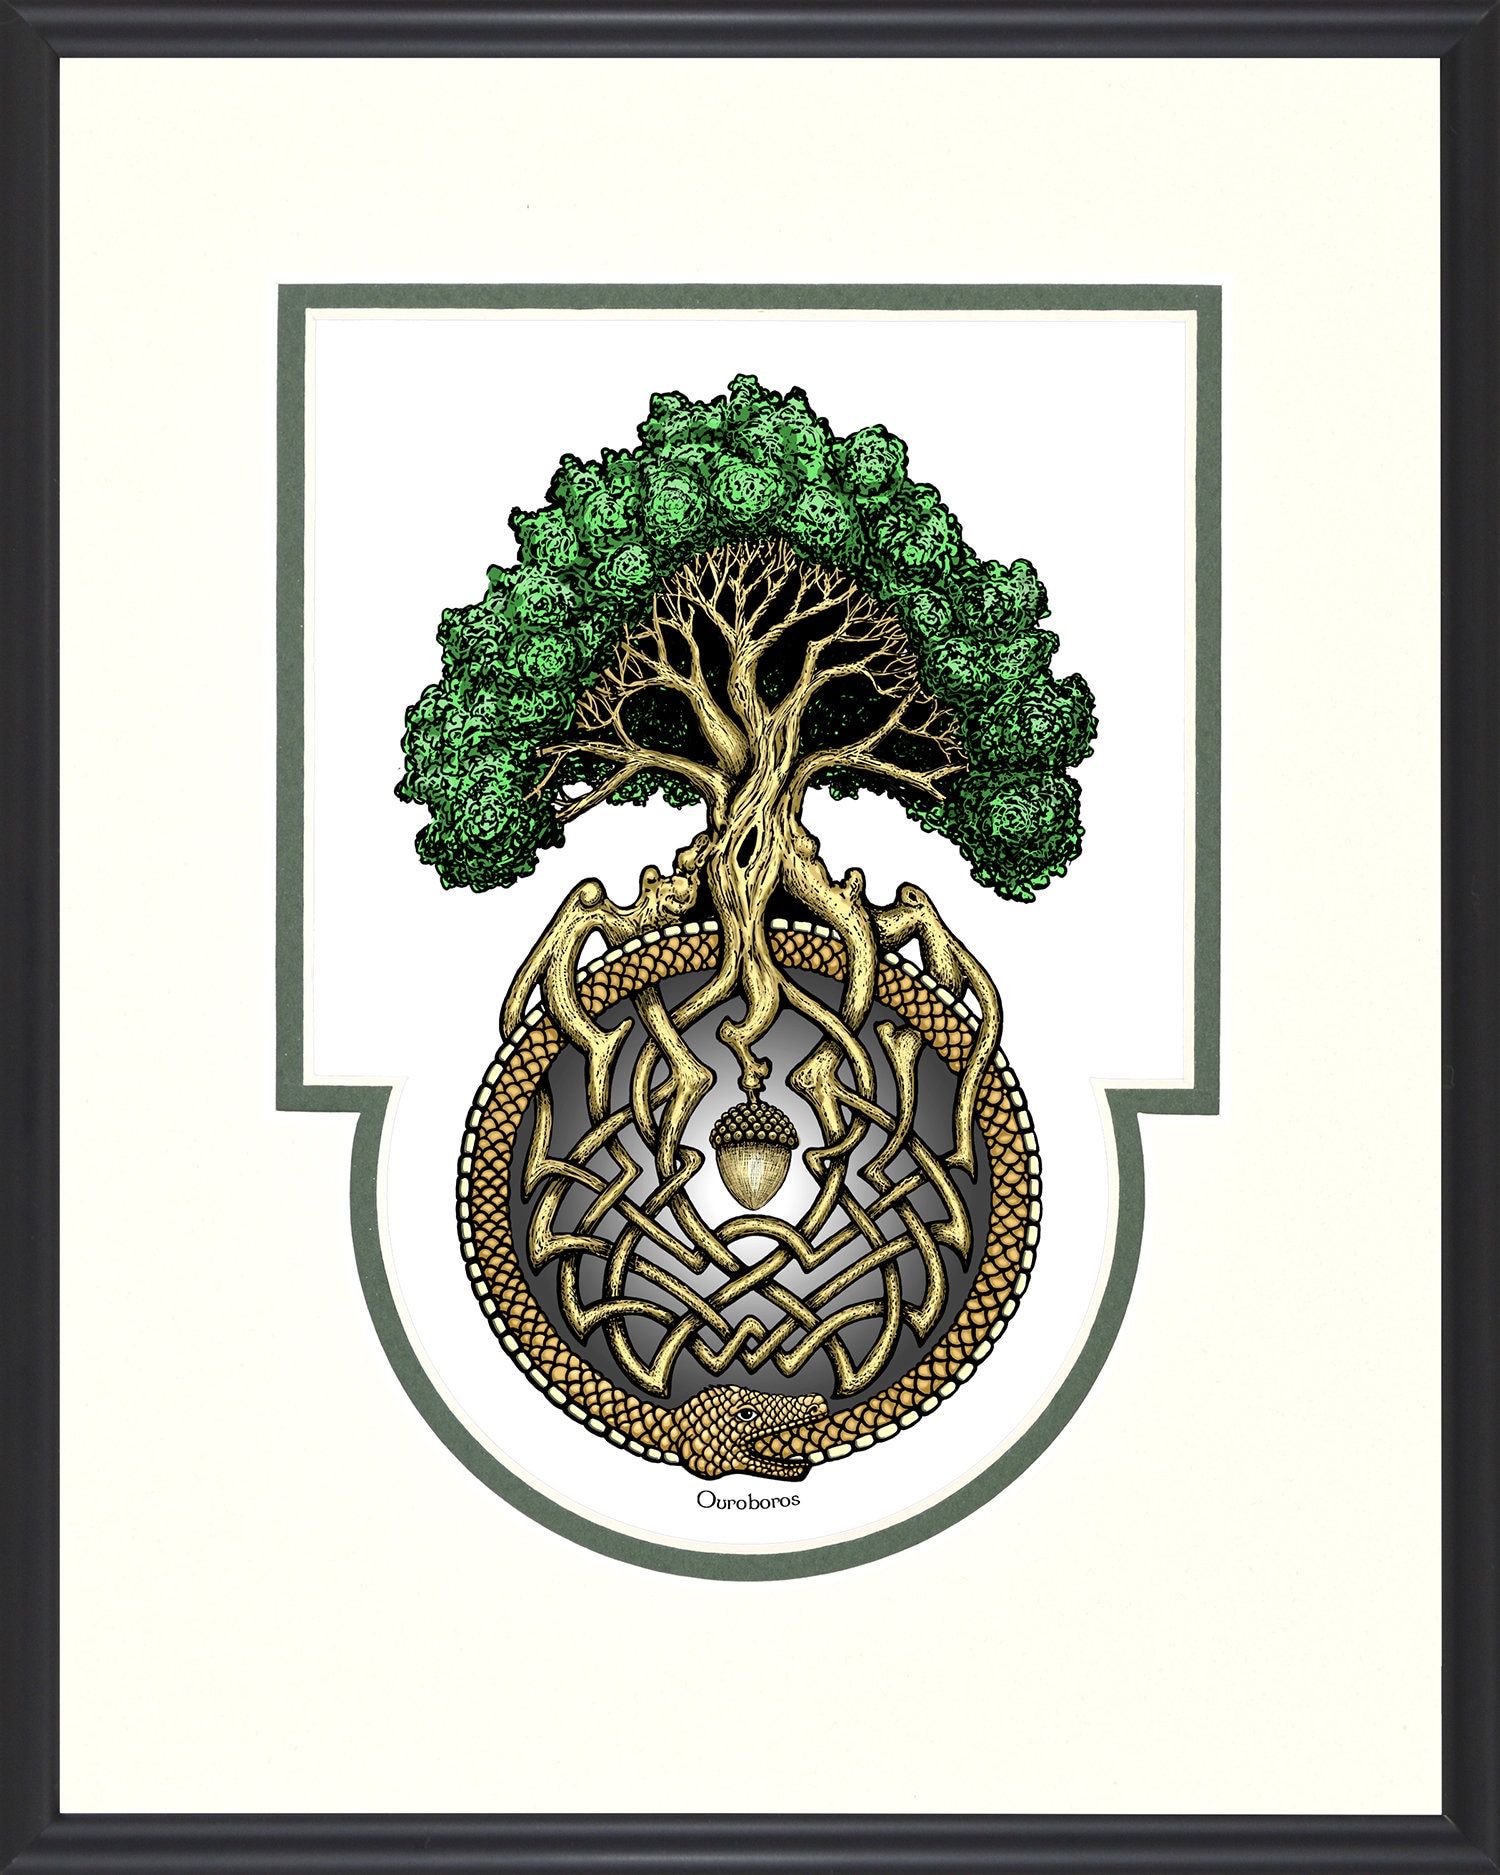 Ouroboros Tree  Framed Digital Art Print – 8 X 10 Throughout Most Recently Released Dragon Tree Framed Art Prints (View 3 of 20)